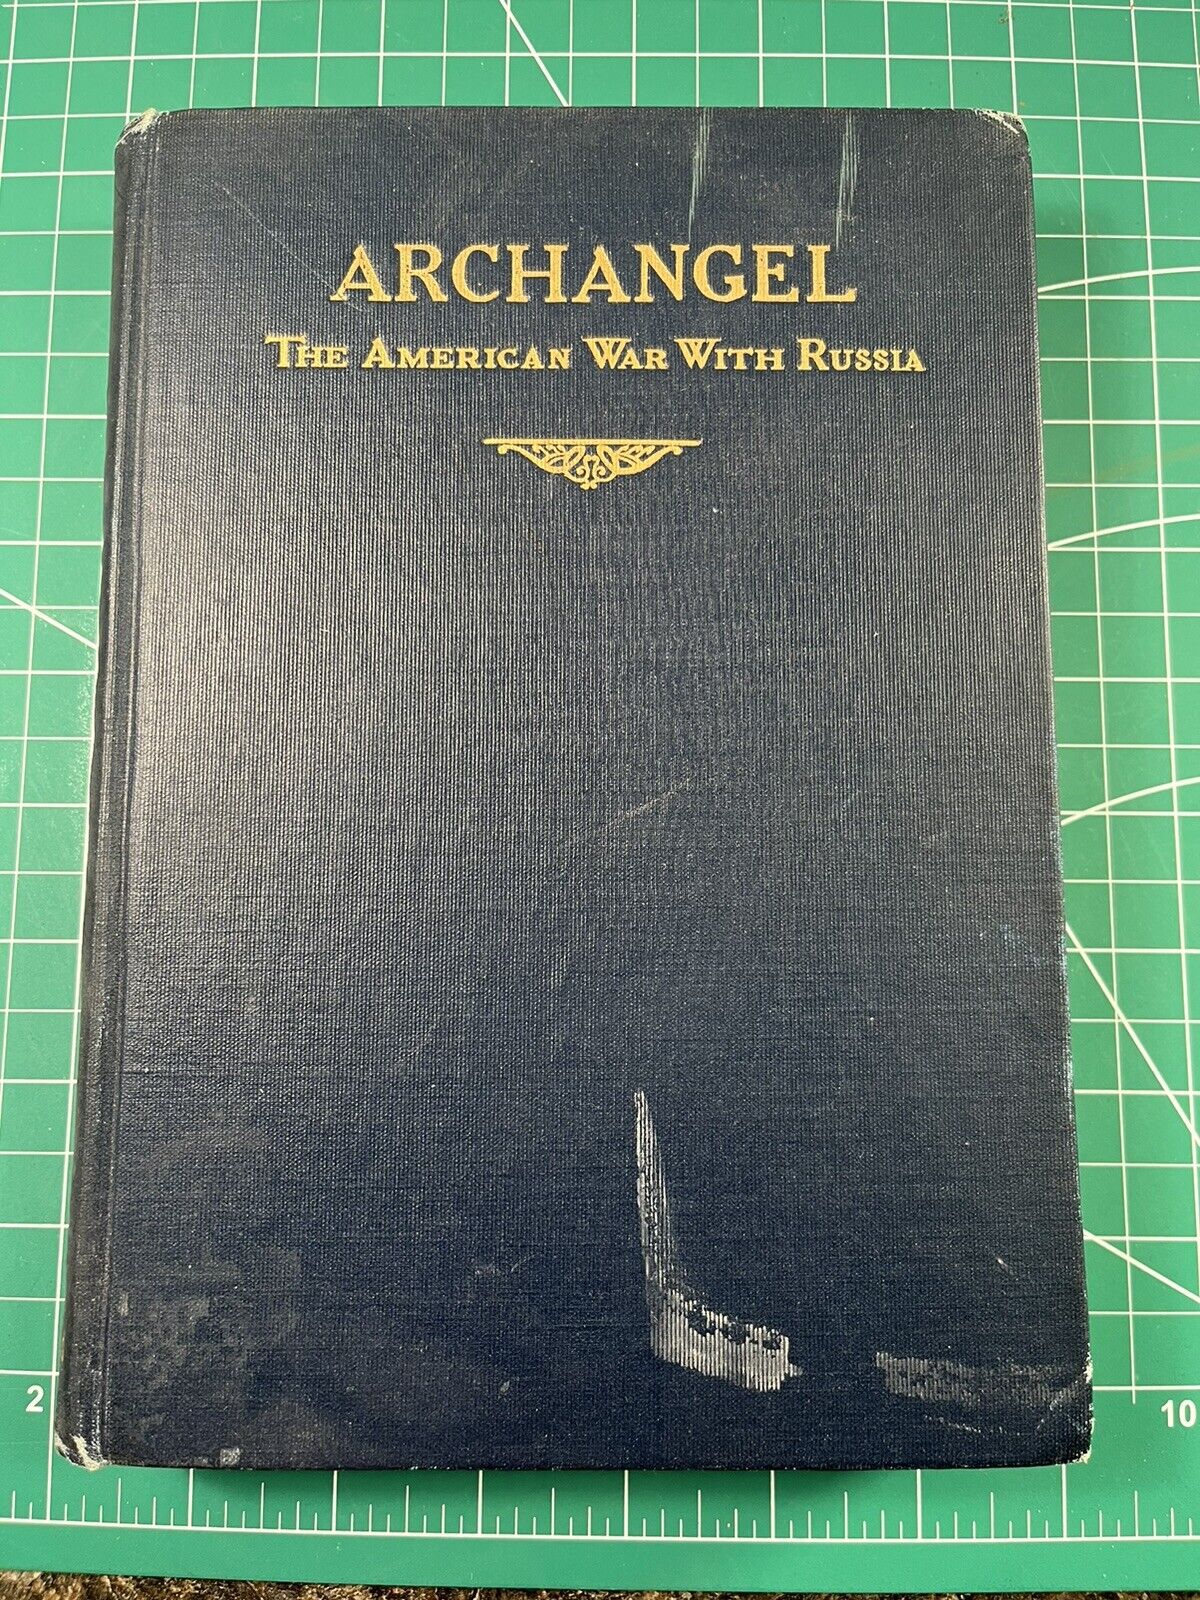 WW1 US History Book Archangel : The American War with Russia by A Chronicler